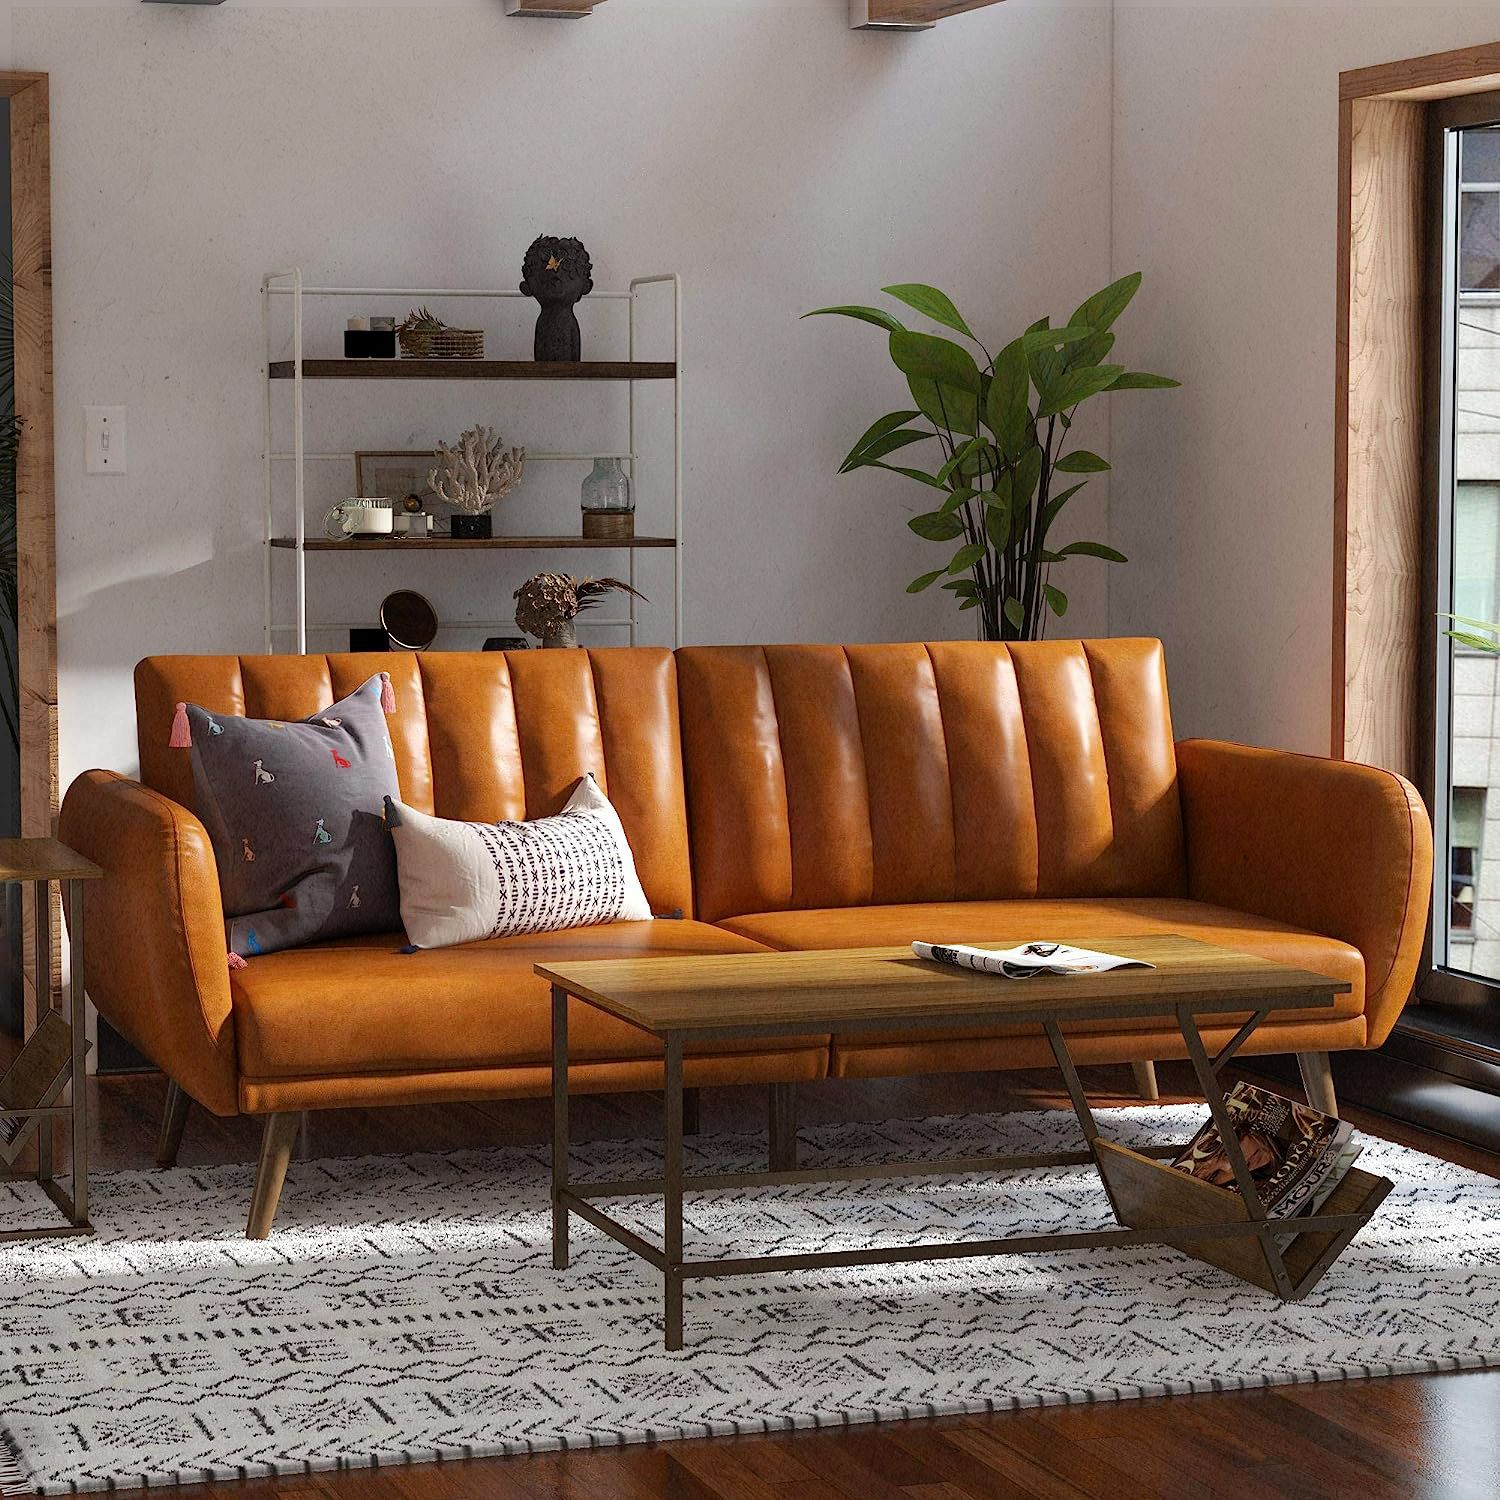 We Found The Top-Rated Couches That Amazon Shoppers Can't Get Enough Of